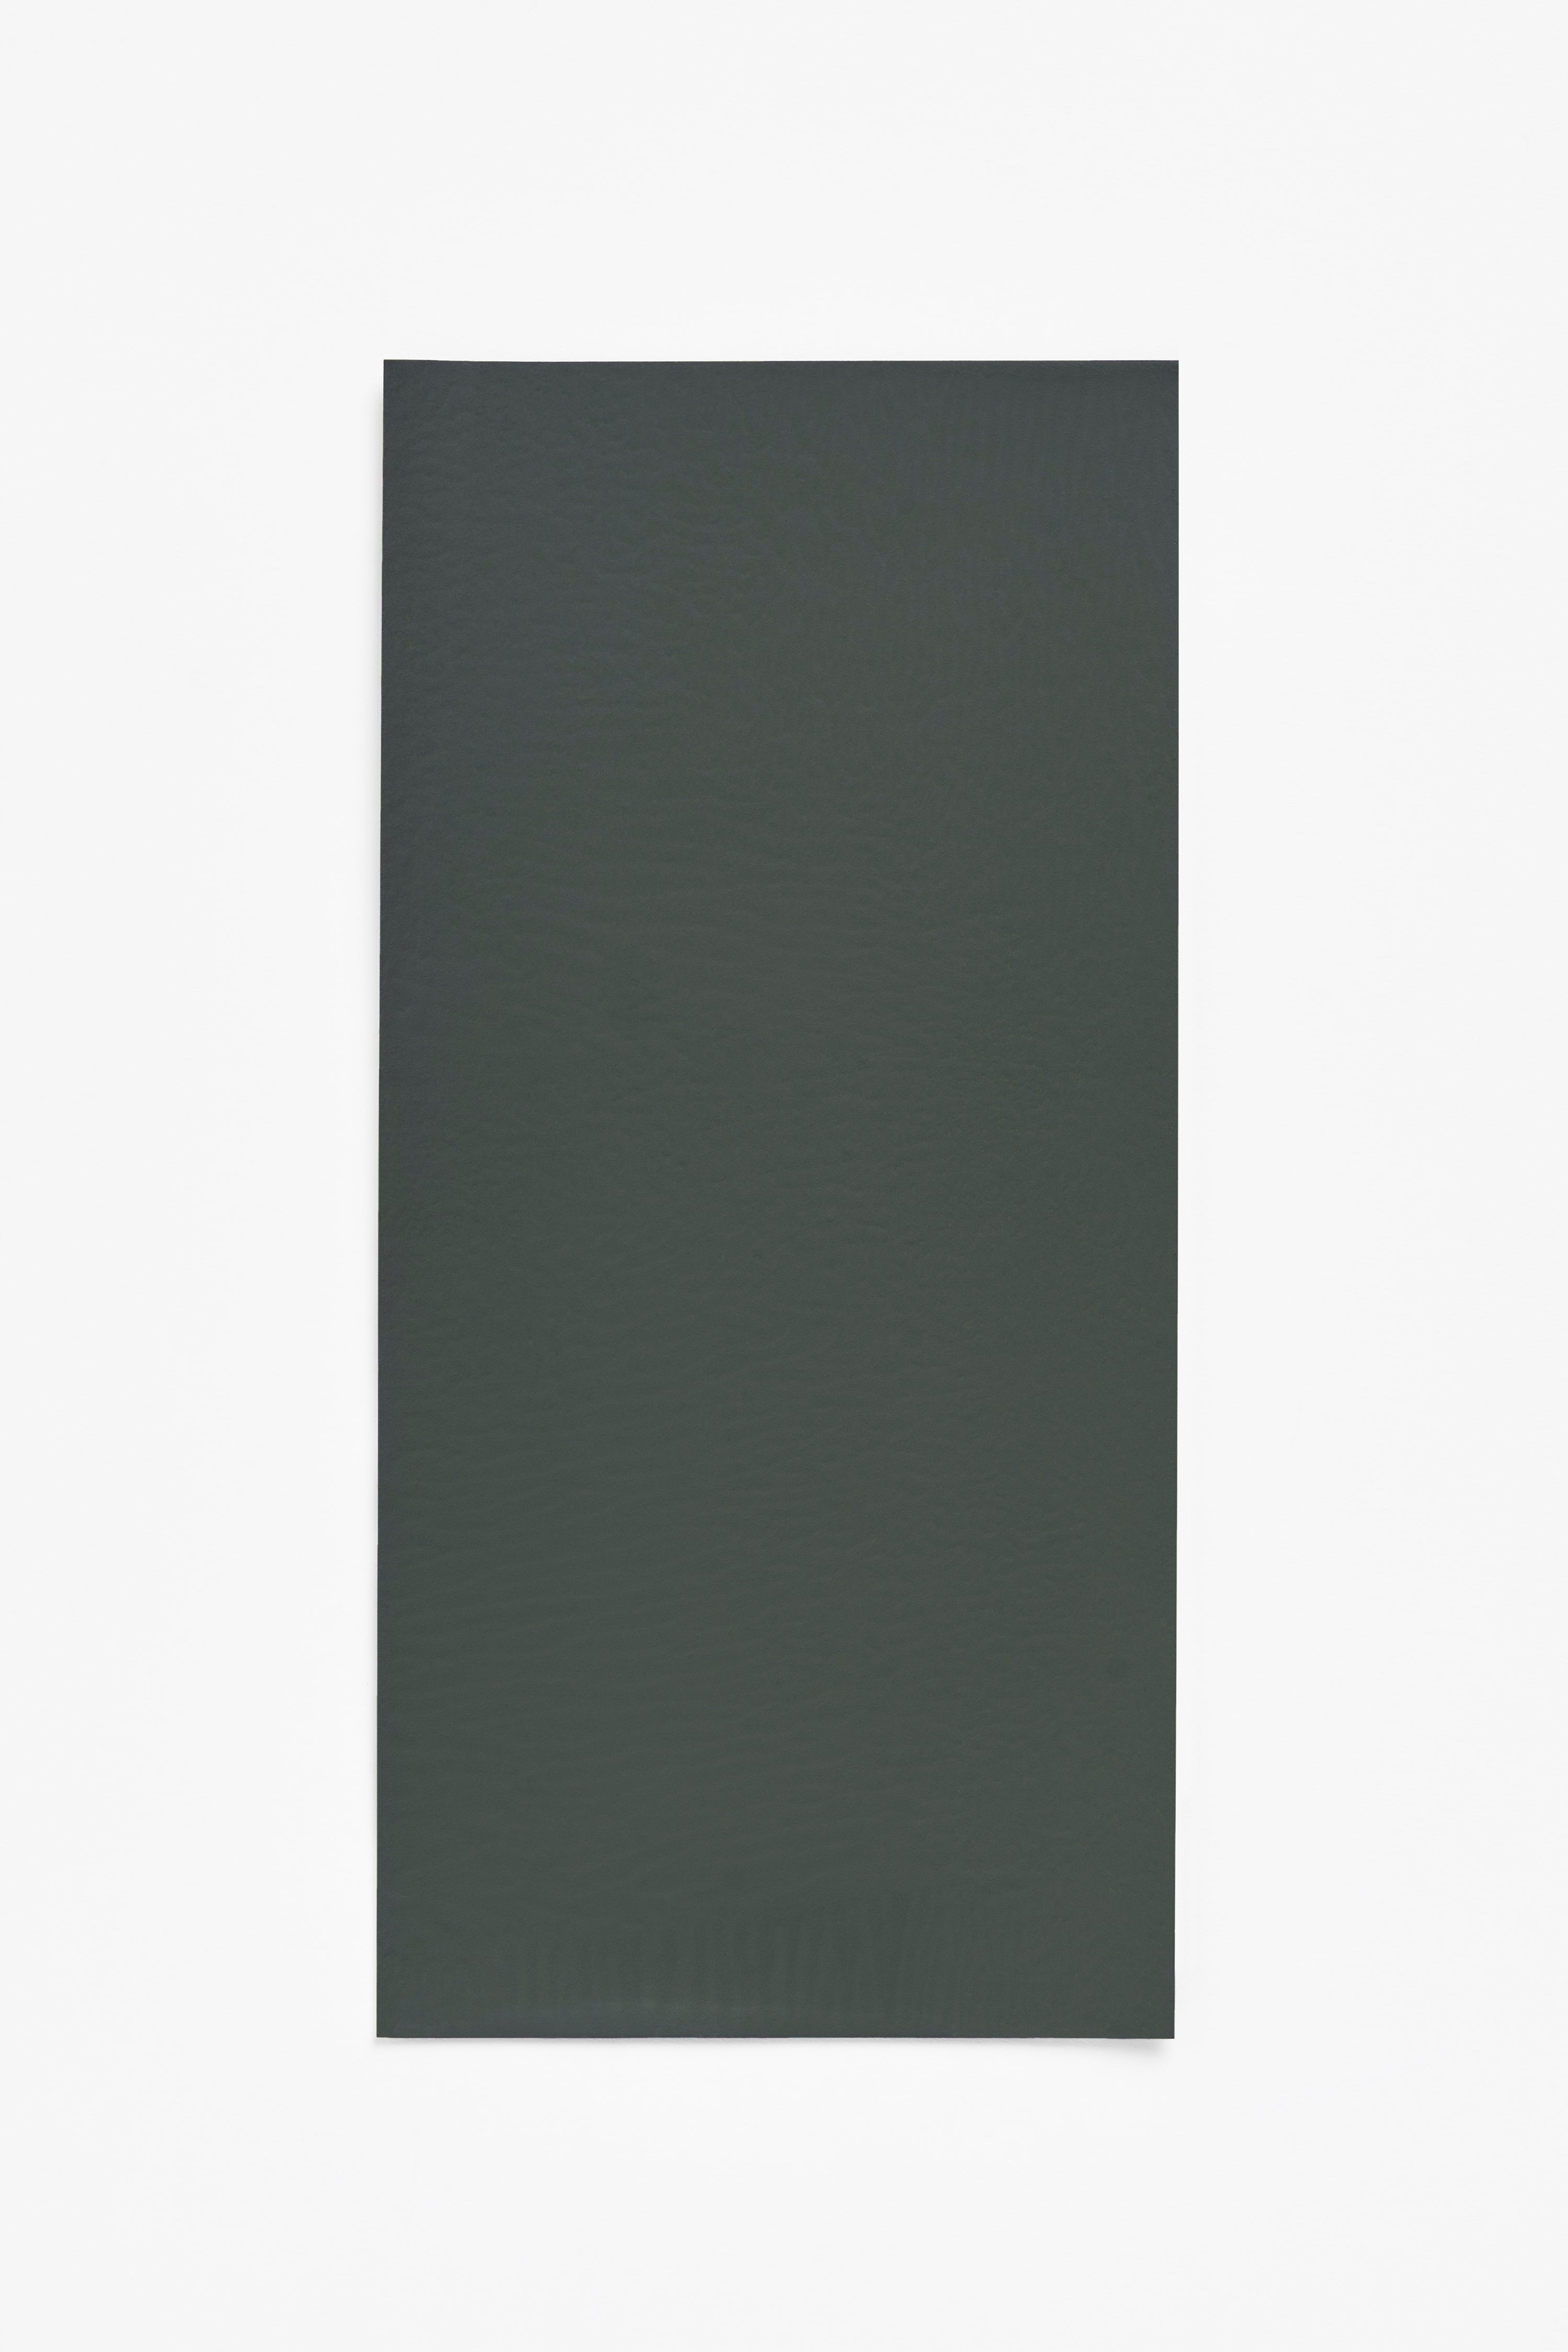 Phtalo — a paint colour developed by Barber Osgerby for Blēo